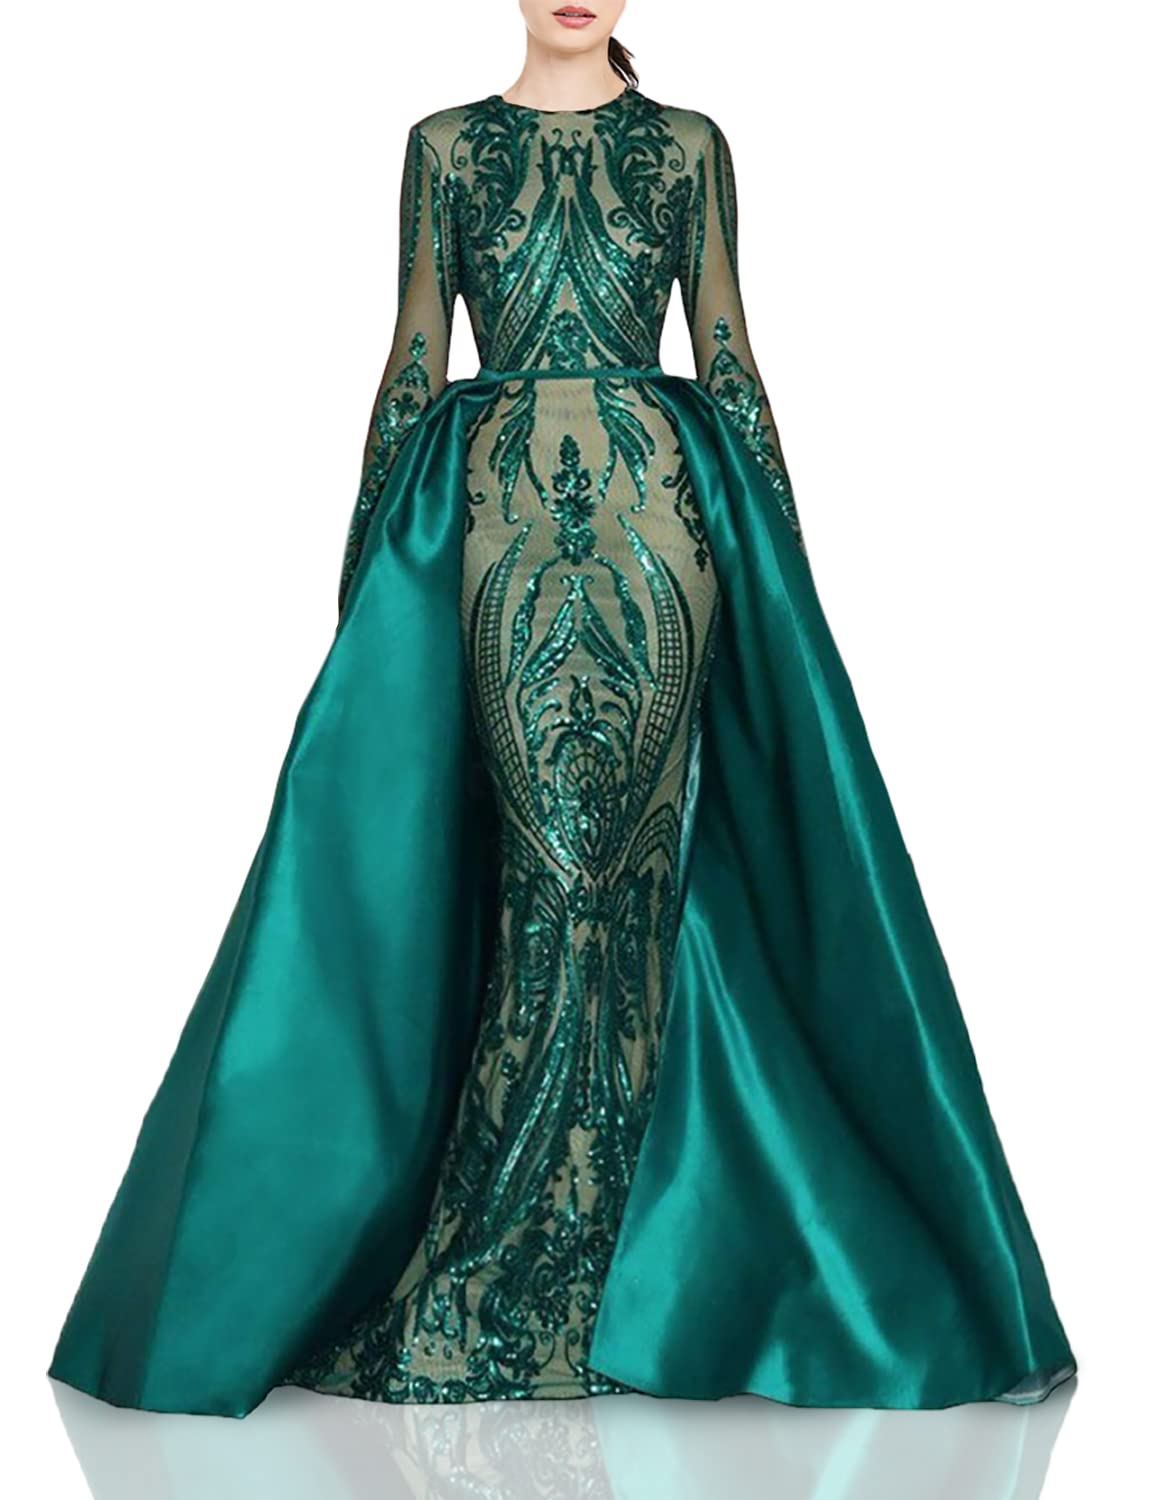 Aries Tuttle Green/Burgundy/Navy Blue Satin Mermaid Prom Evening Party Dress Gown Detachable Train